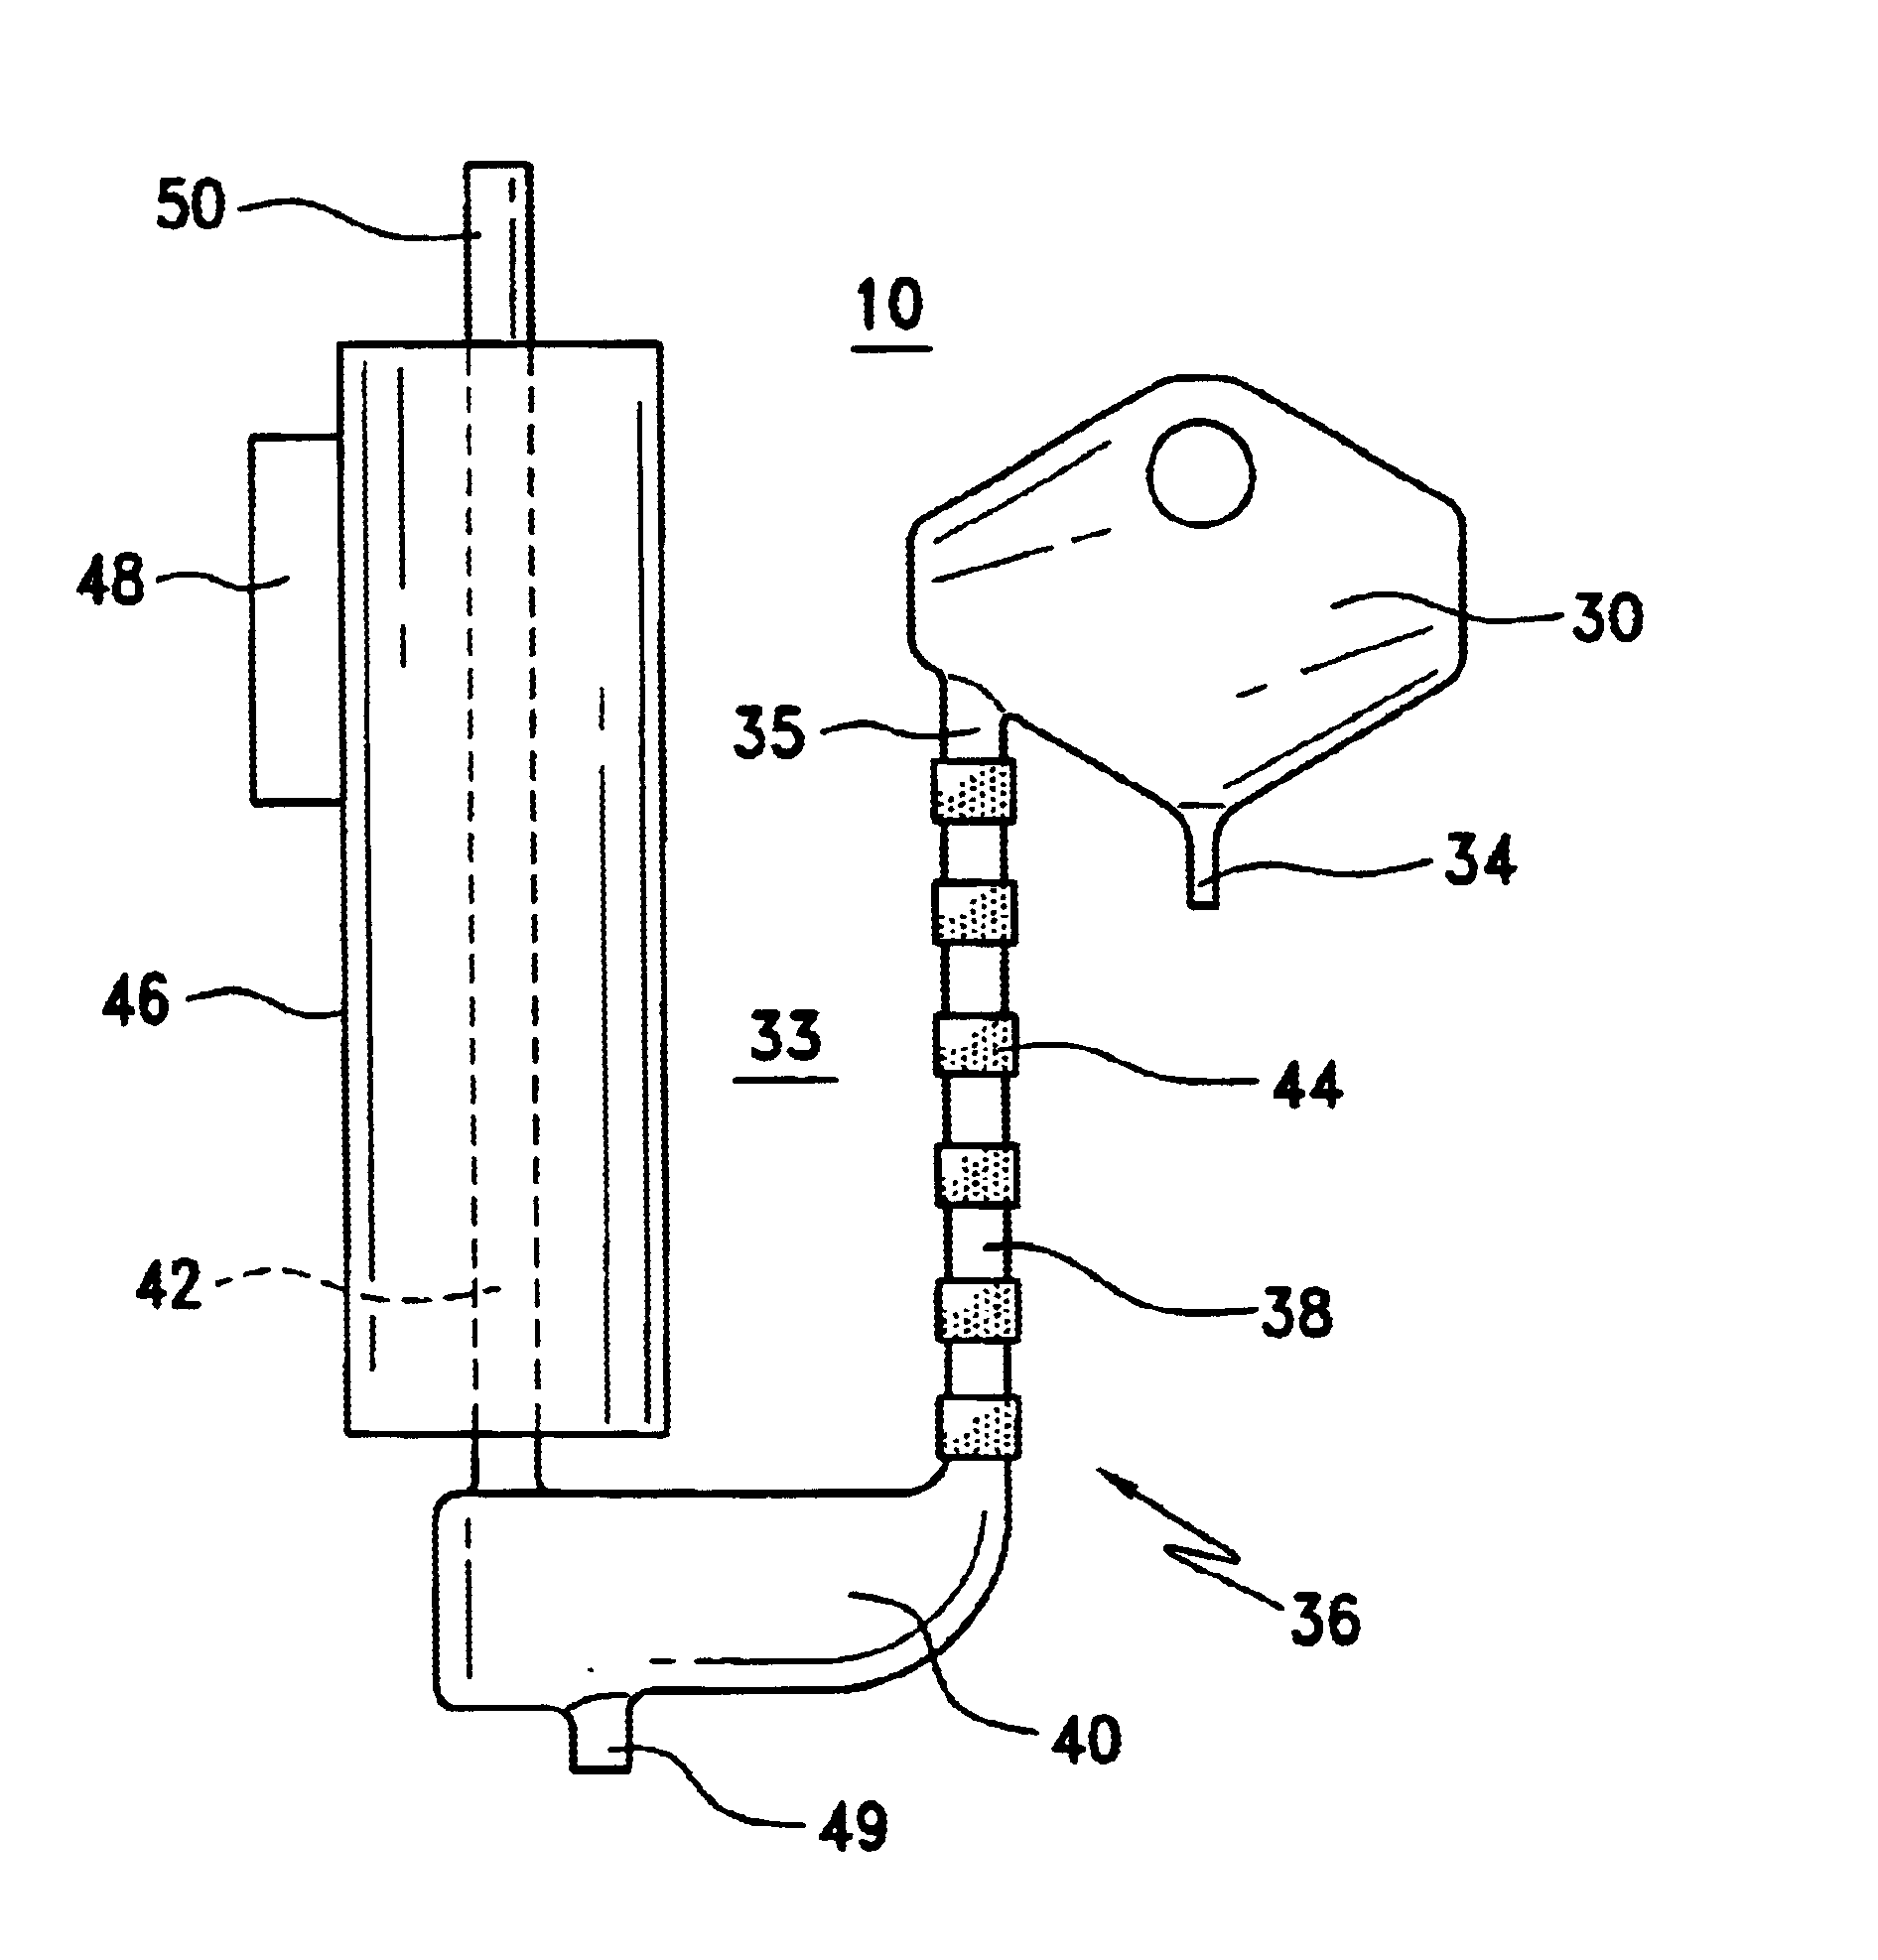 Spectrometer sample generating and injecting system using a microliter nebulizer